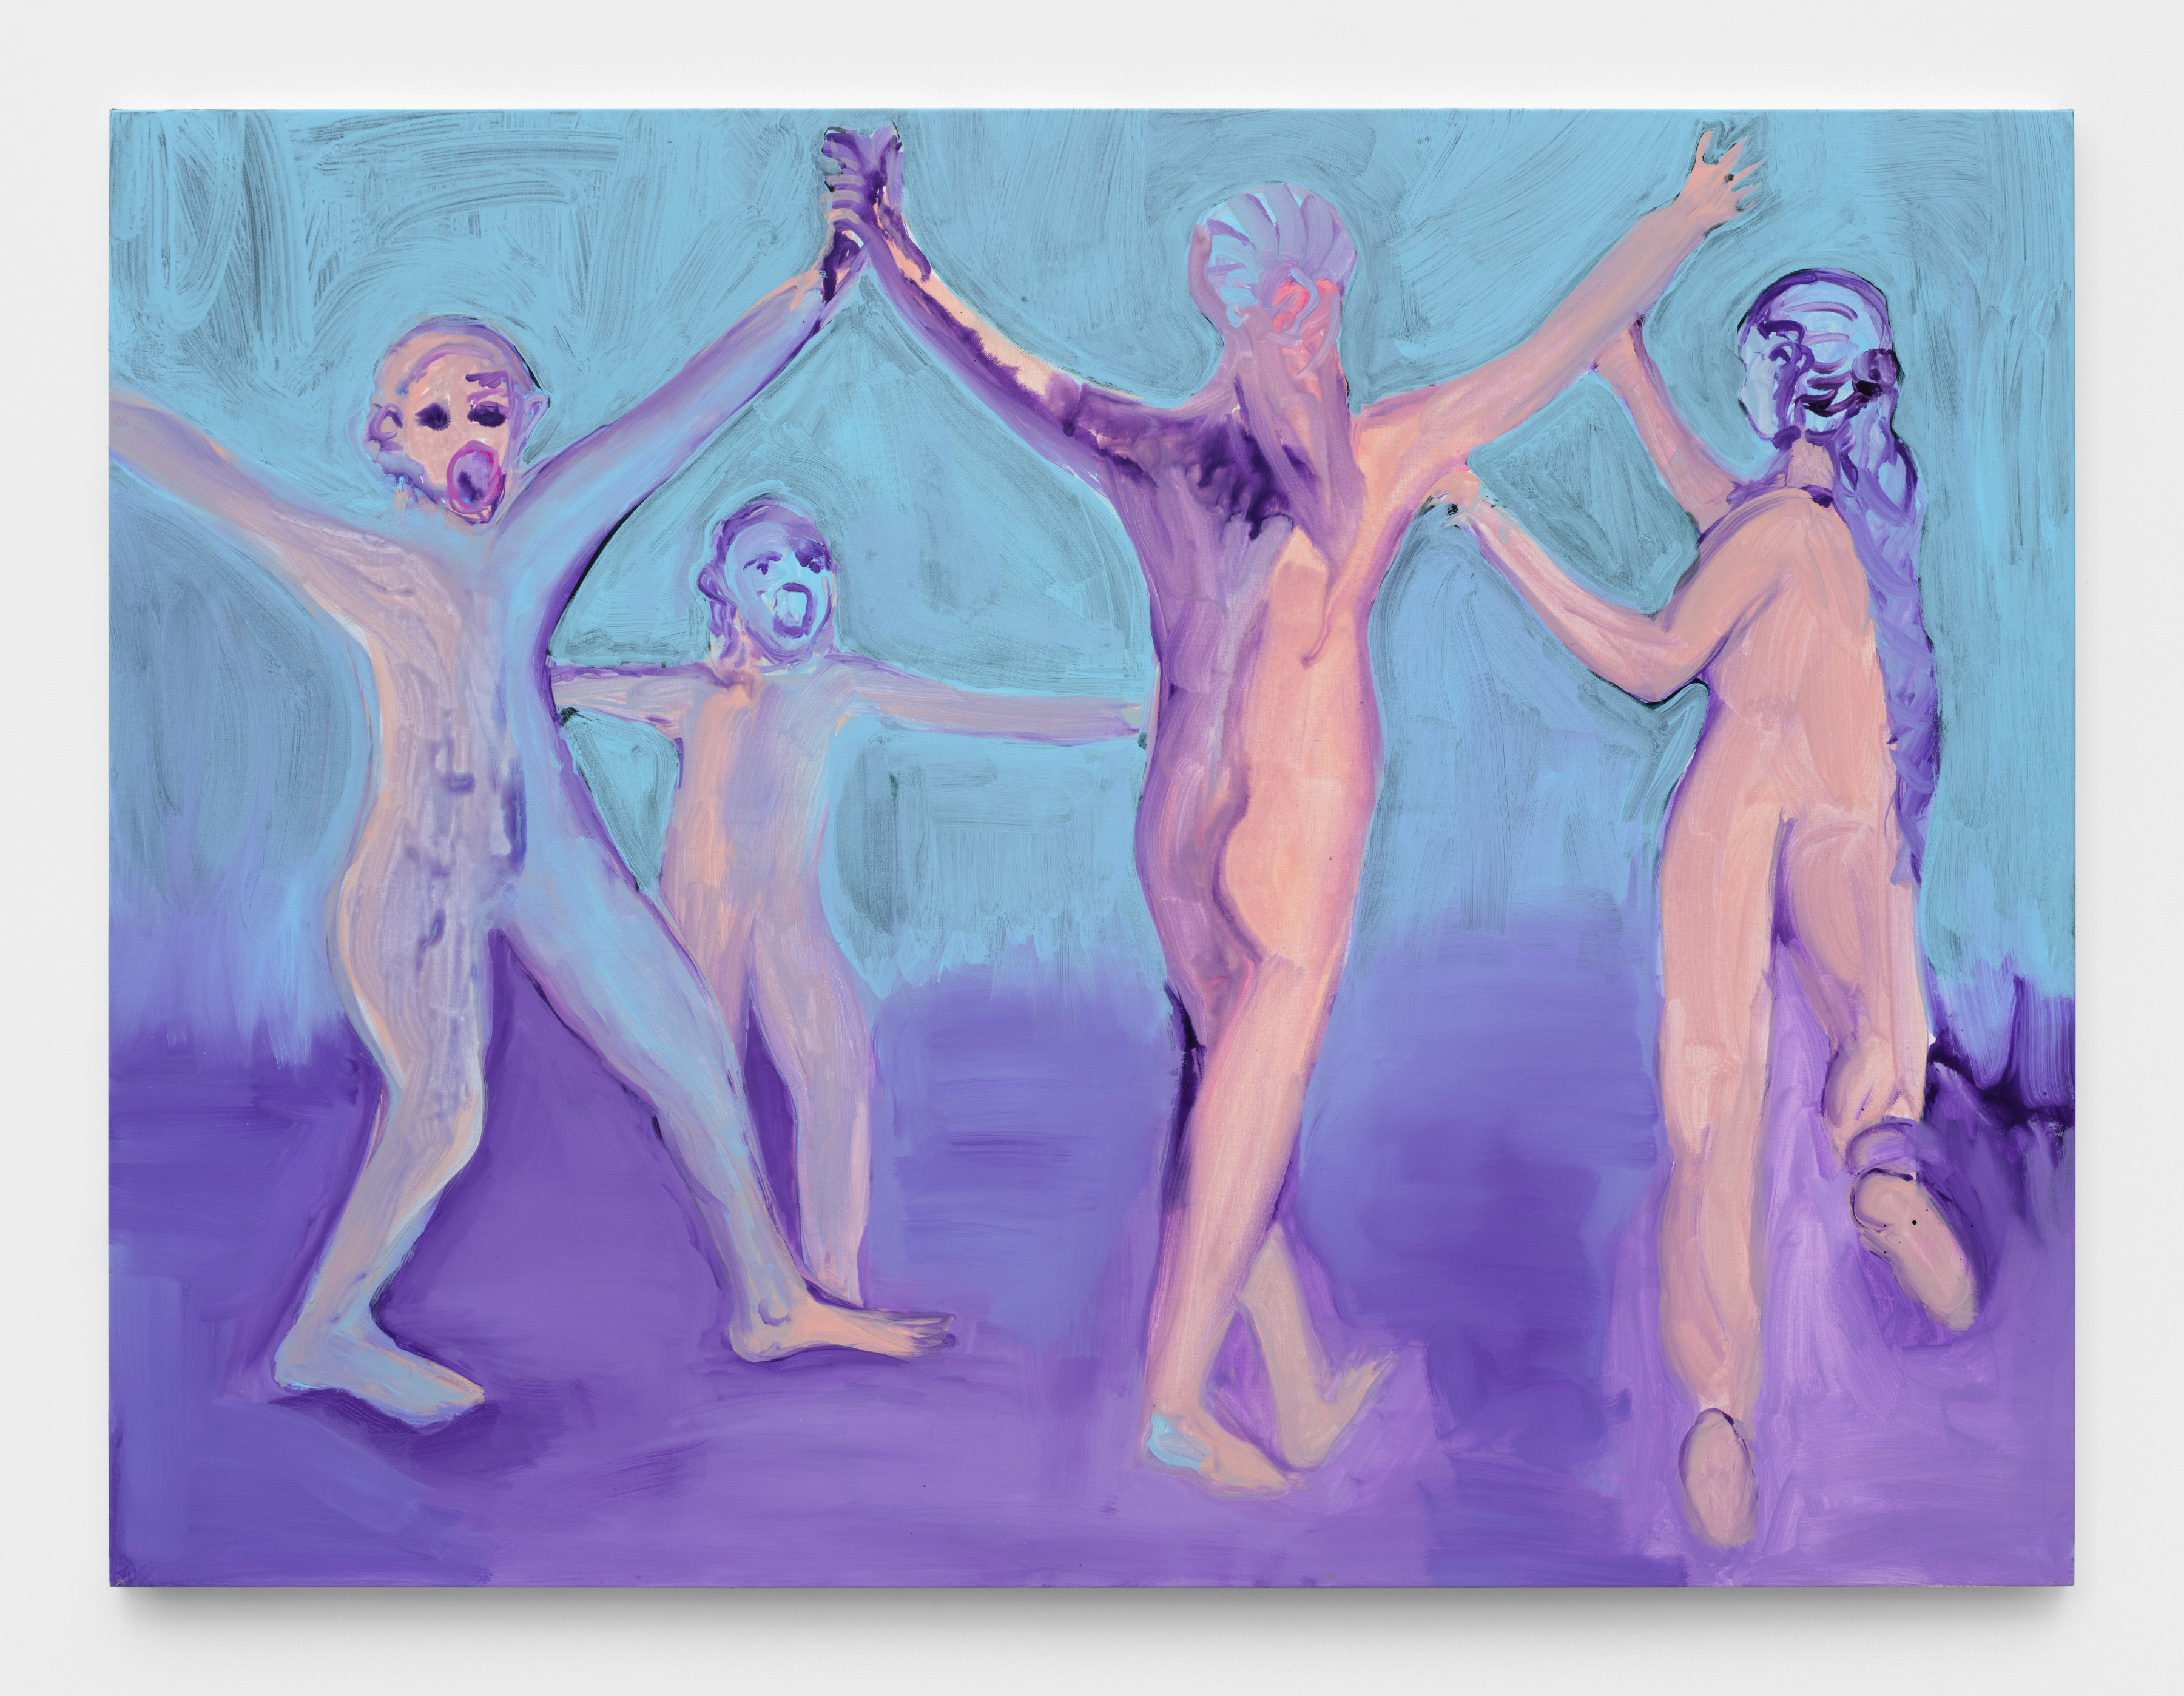 On a blue and purple background four nude figures dance in a circle with their arms raised and mouths agape in exaltation.